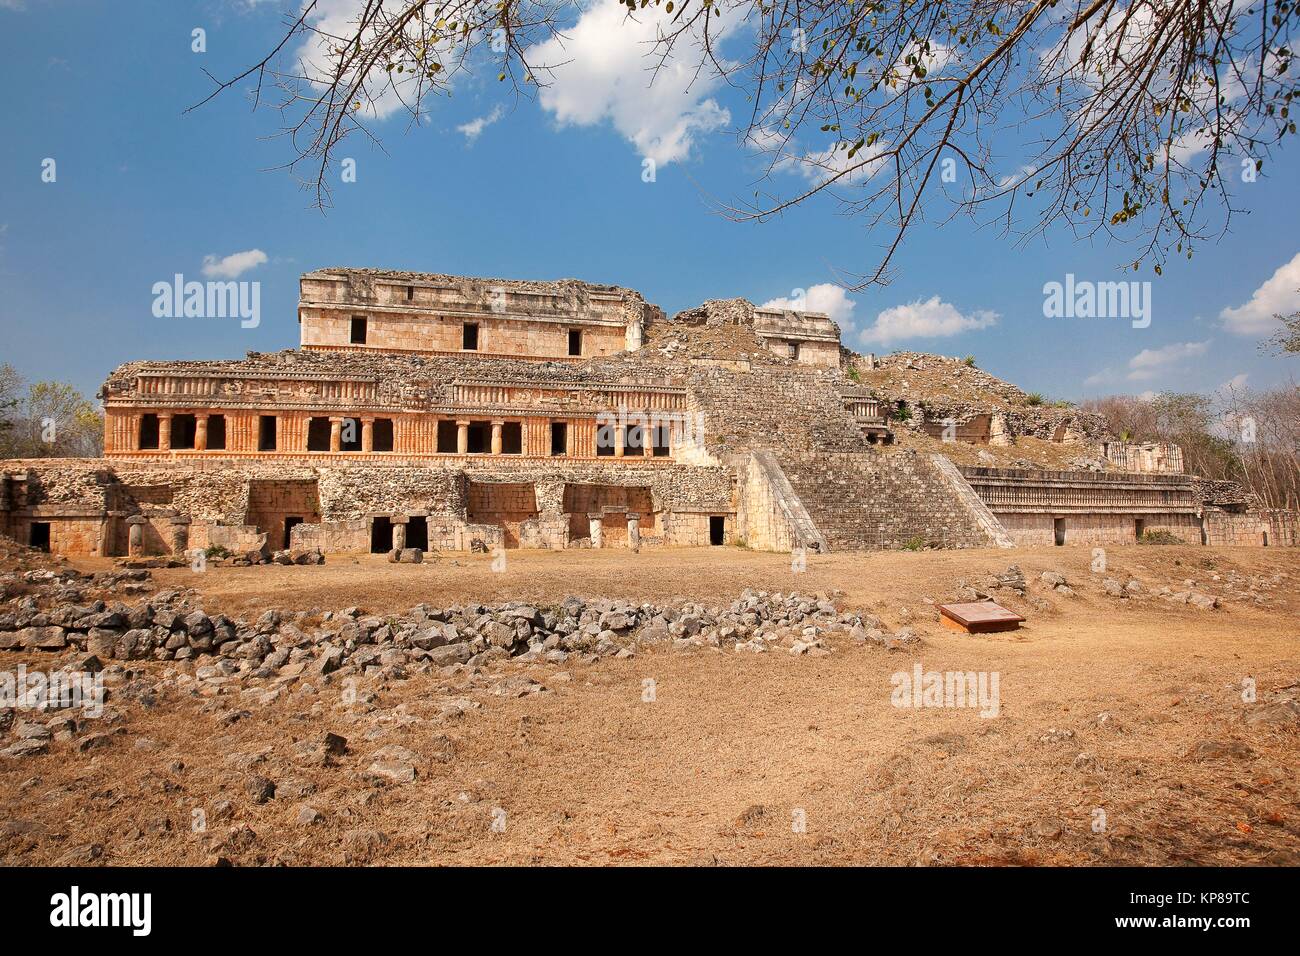 View to the Great Palace-Palacio Norte in Maya Archaeological Site Sayil in the Puuc Route, Yucatan State, Mexico, Central America. Stock Photo